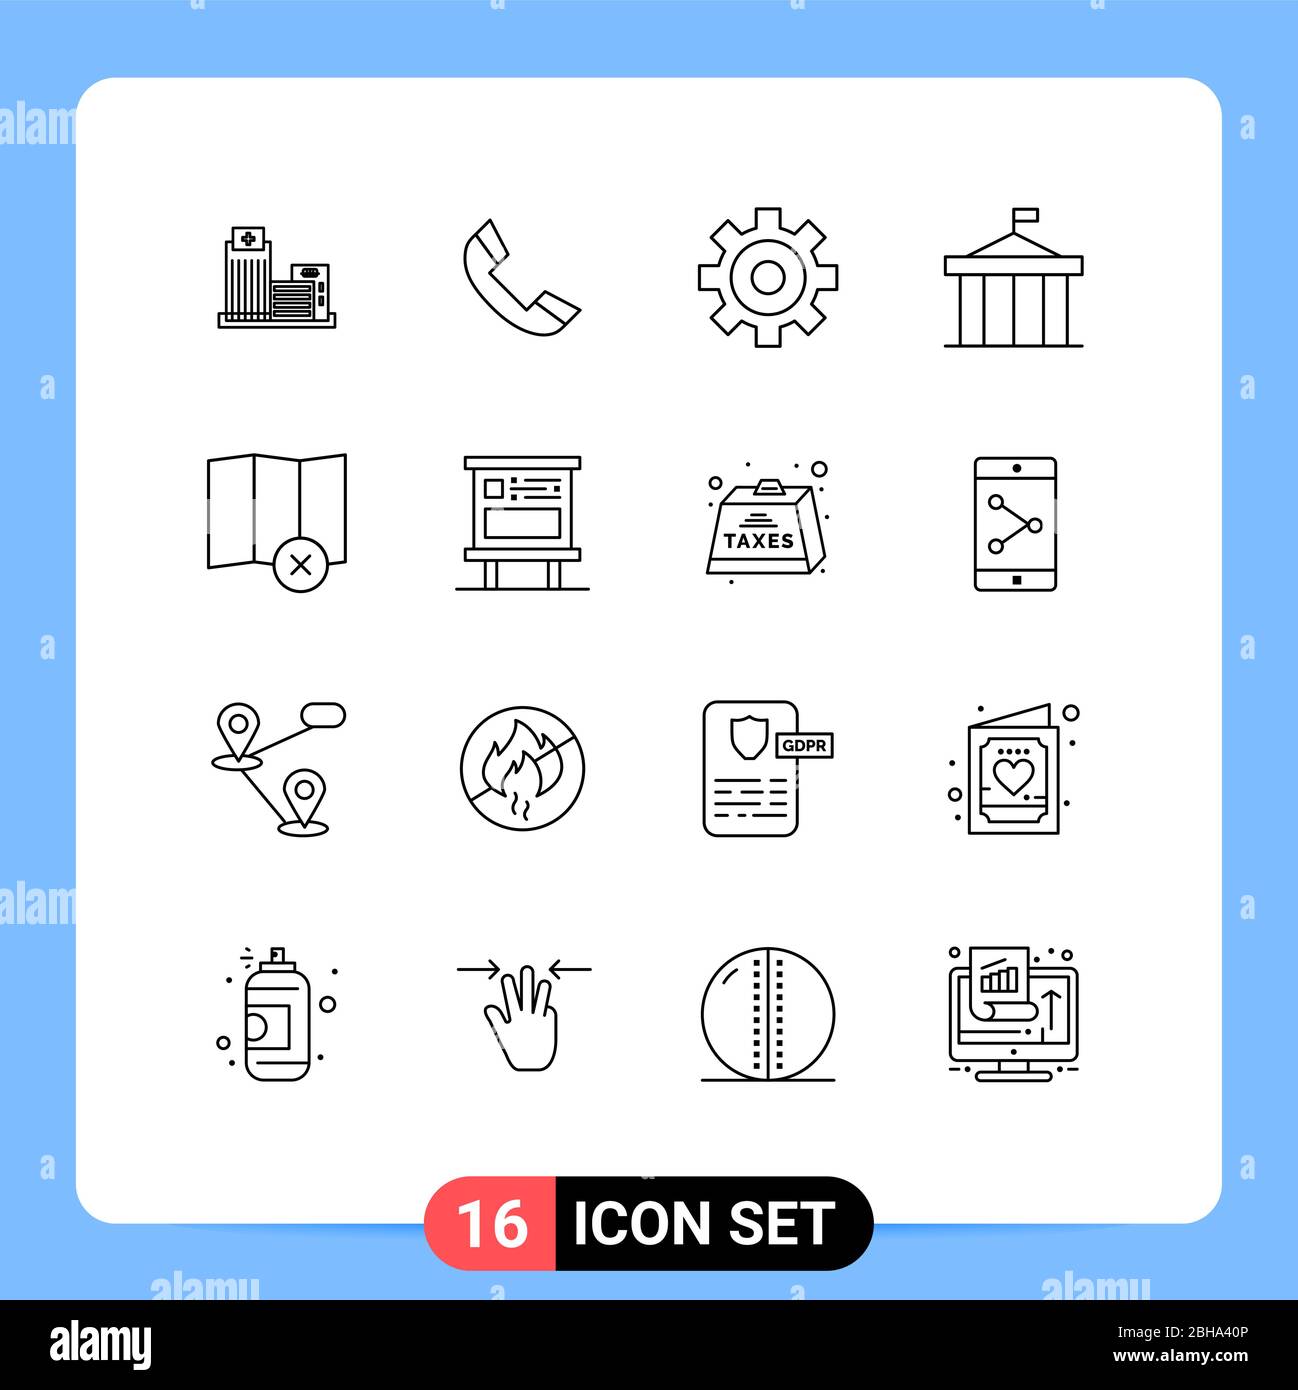 16 User Interface Outline Pack of modern Signs and Symbols of map, clear, telephone, greece, columns Editable Vector Design Elements Stock Vector